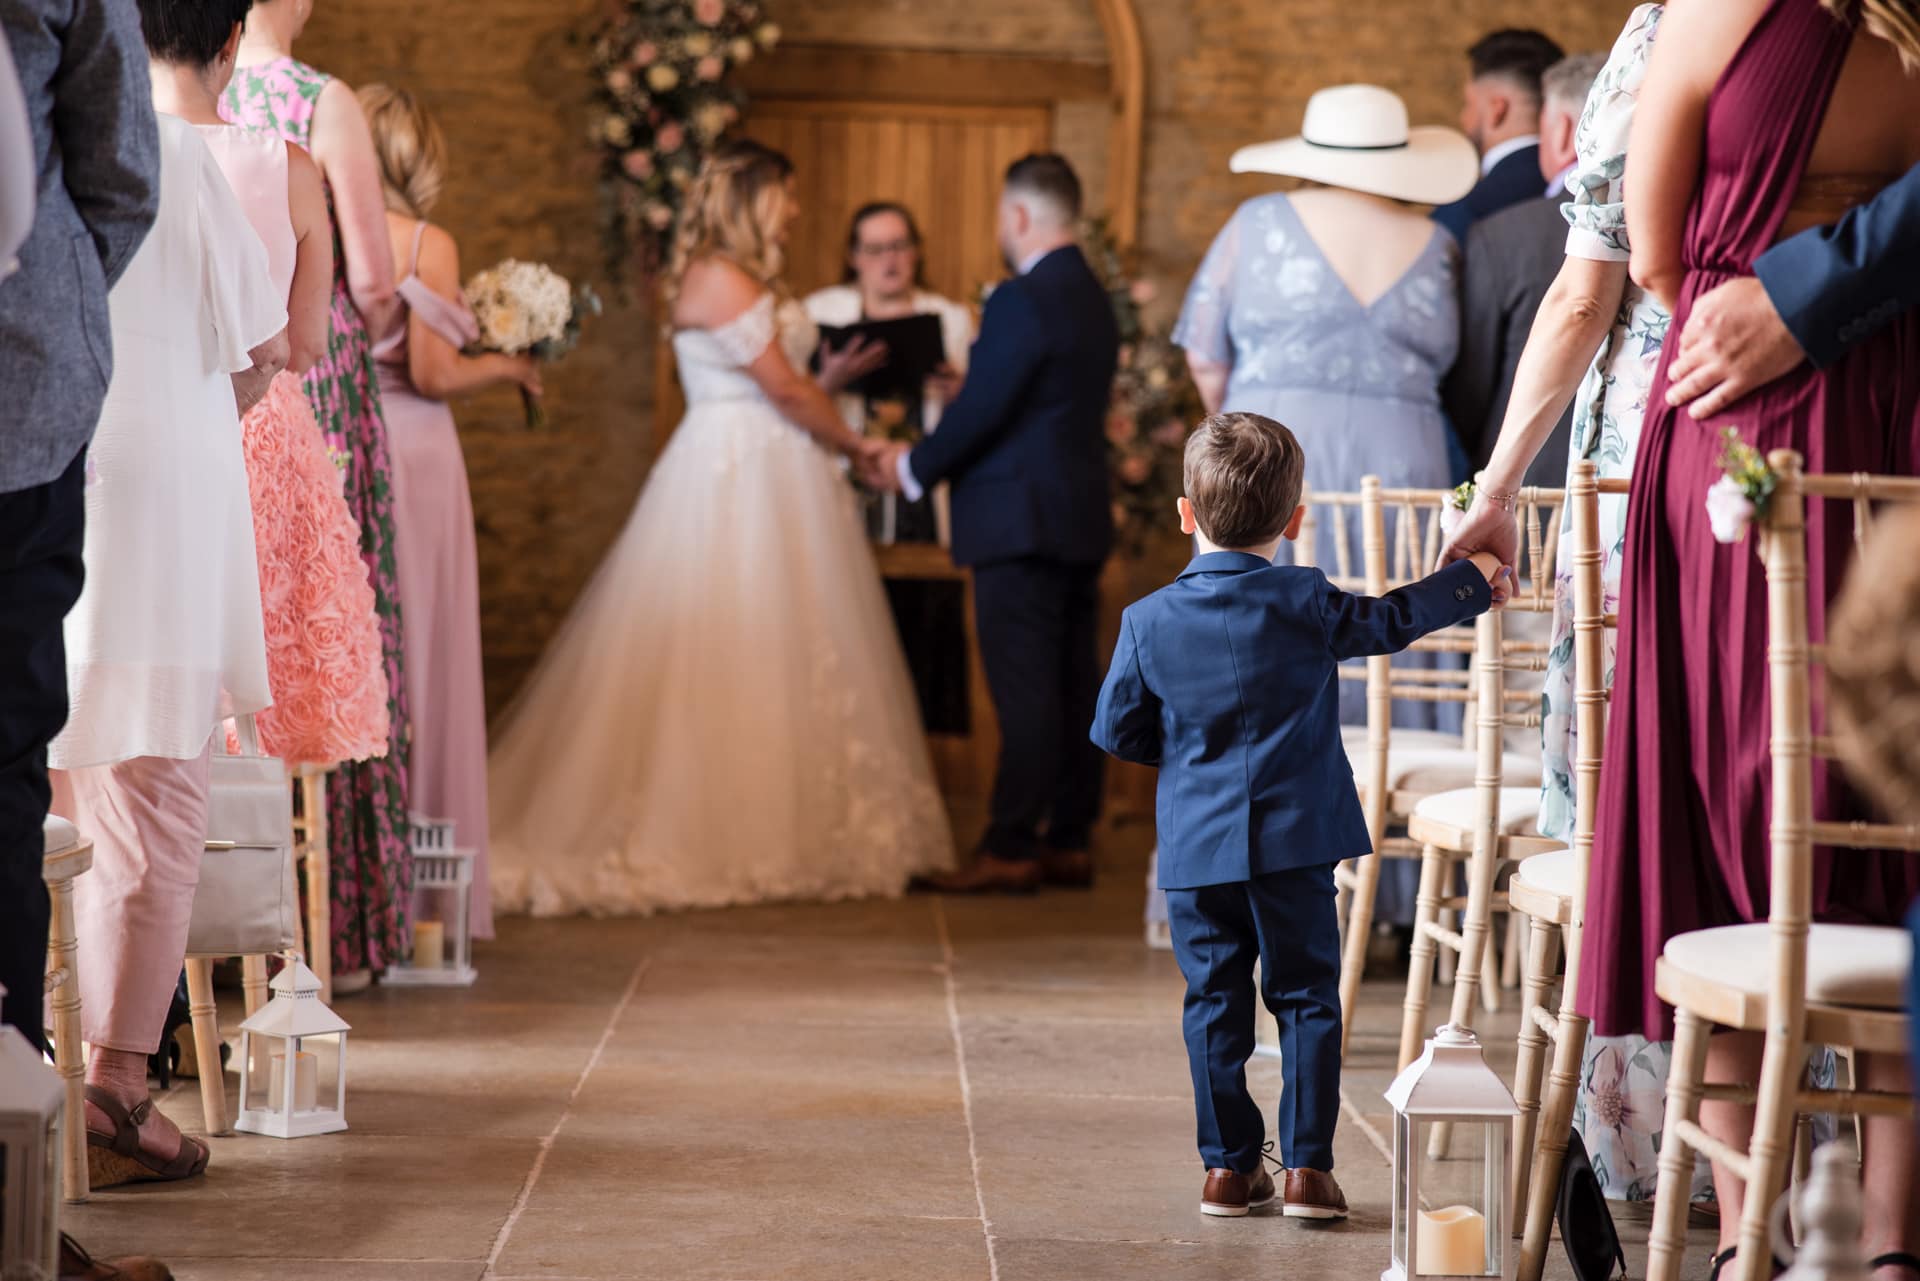 Young boy in suit looks at Bride and Groom during ceremony